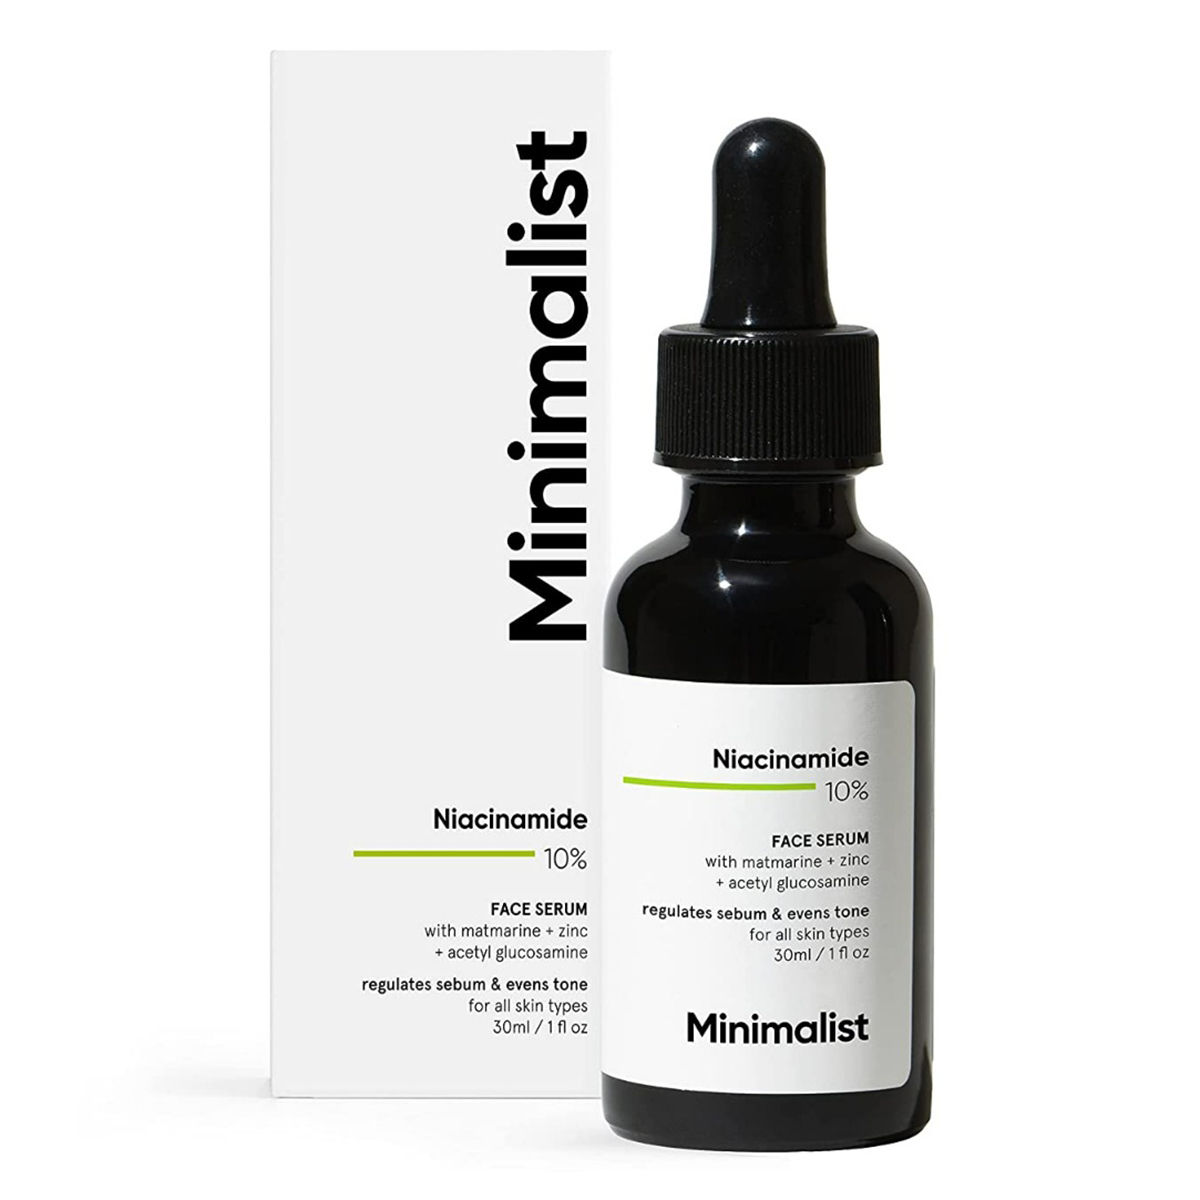 Buy Minimalist 10% Niacinamide Face Serum | Reduces Oil and Acne Spots | 30 ml Online